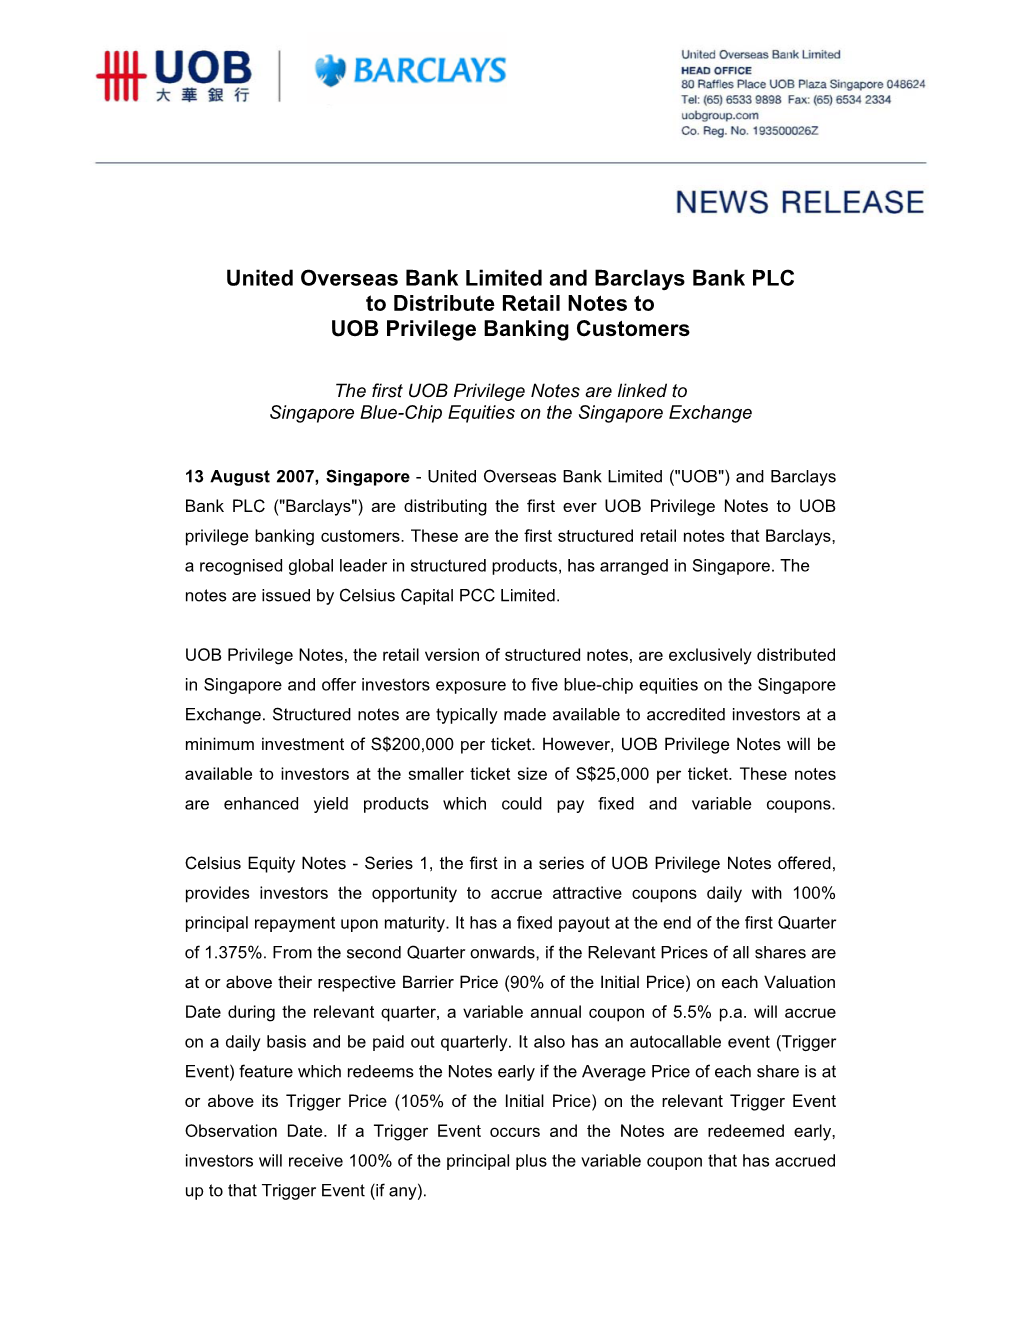 United Overseas Bank Limited and Barclays Bank PLC to Distribute Retail Notes to UOB Privilege Banking Customers